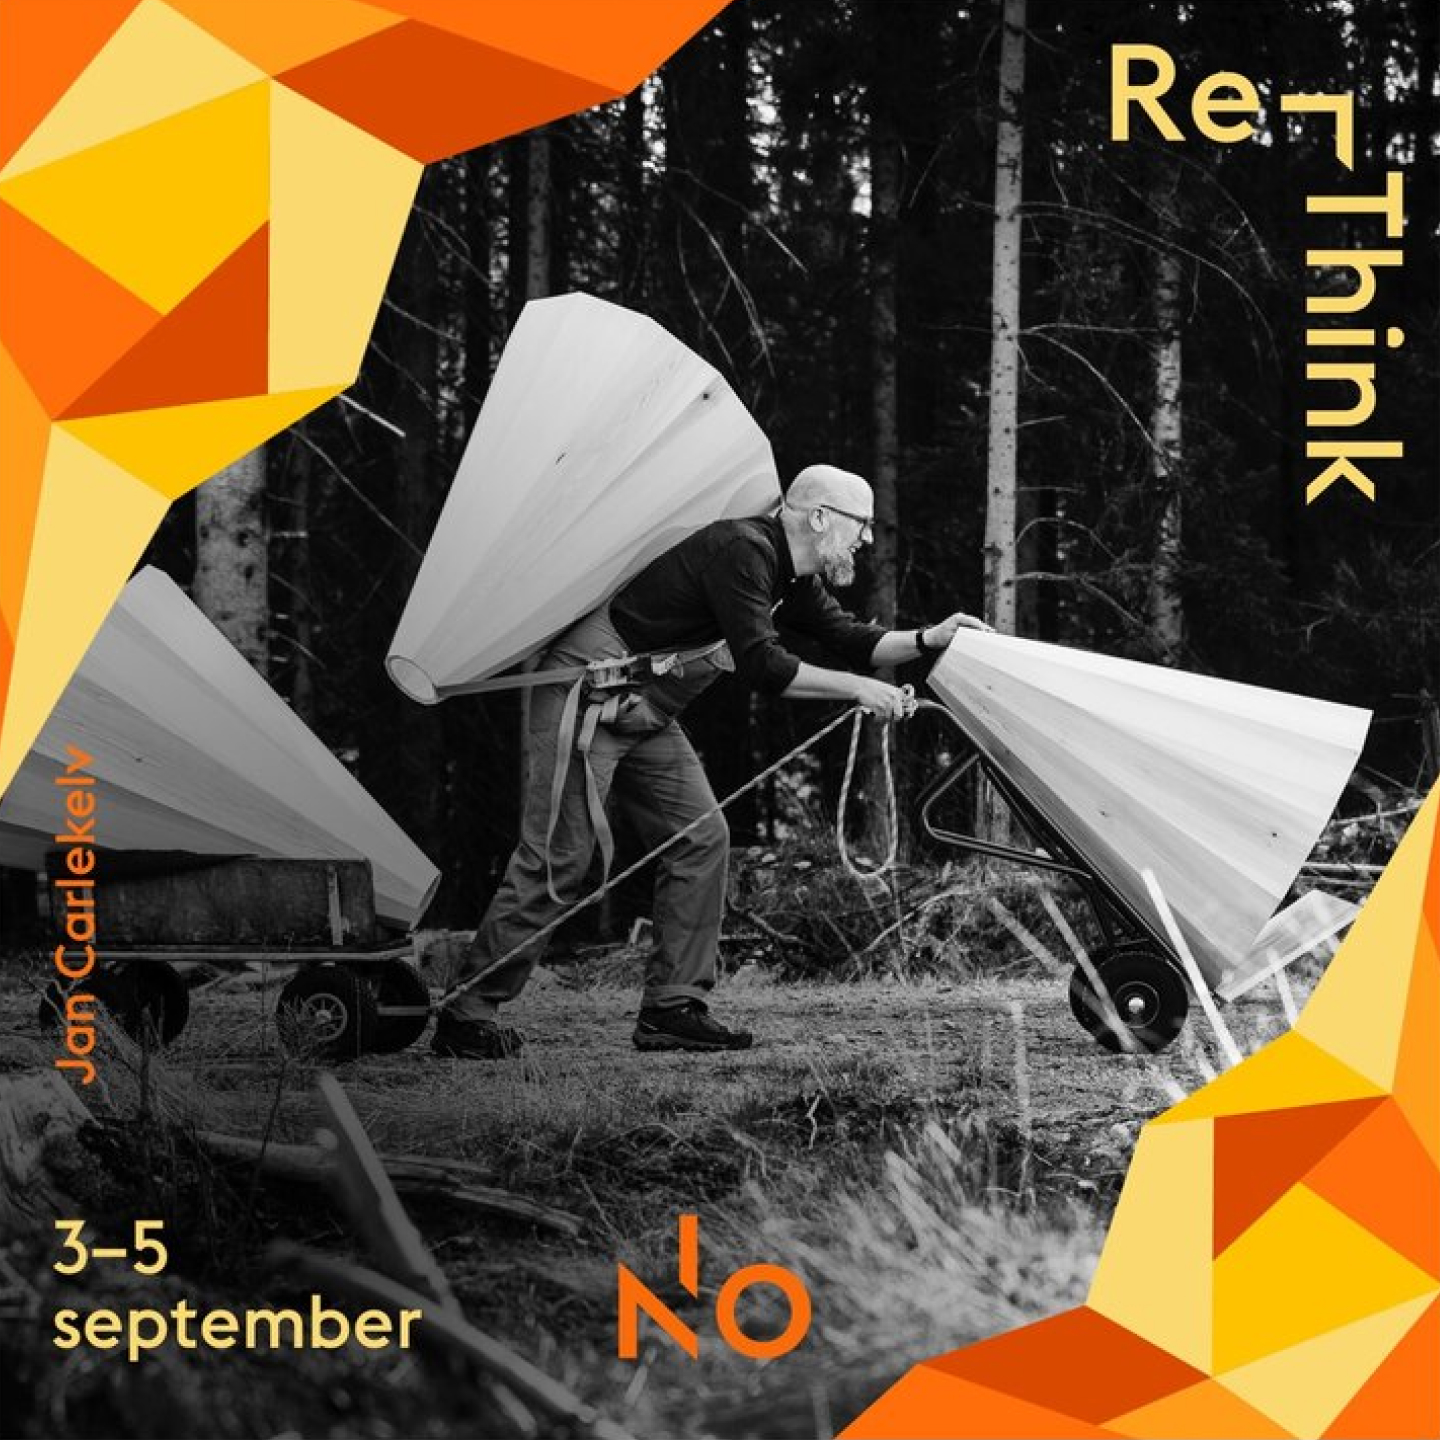 10.Re-think